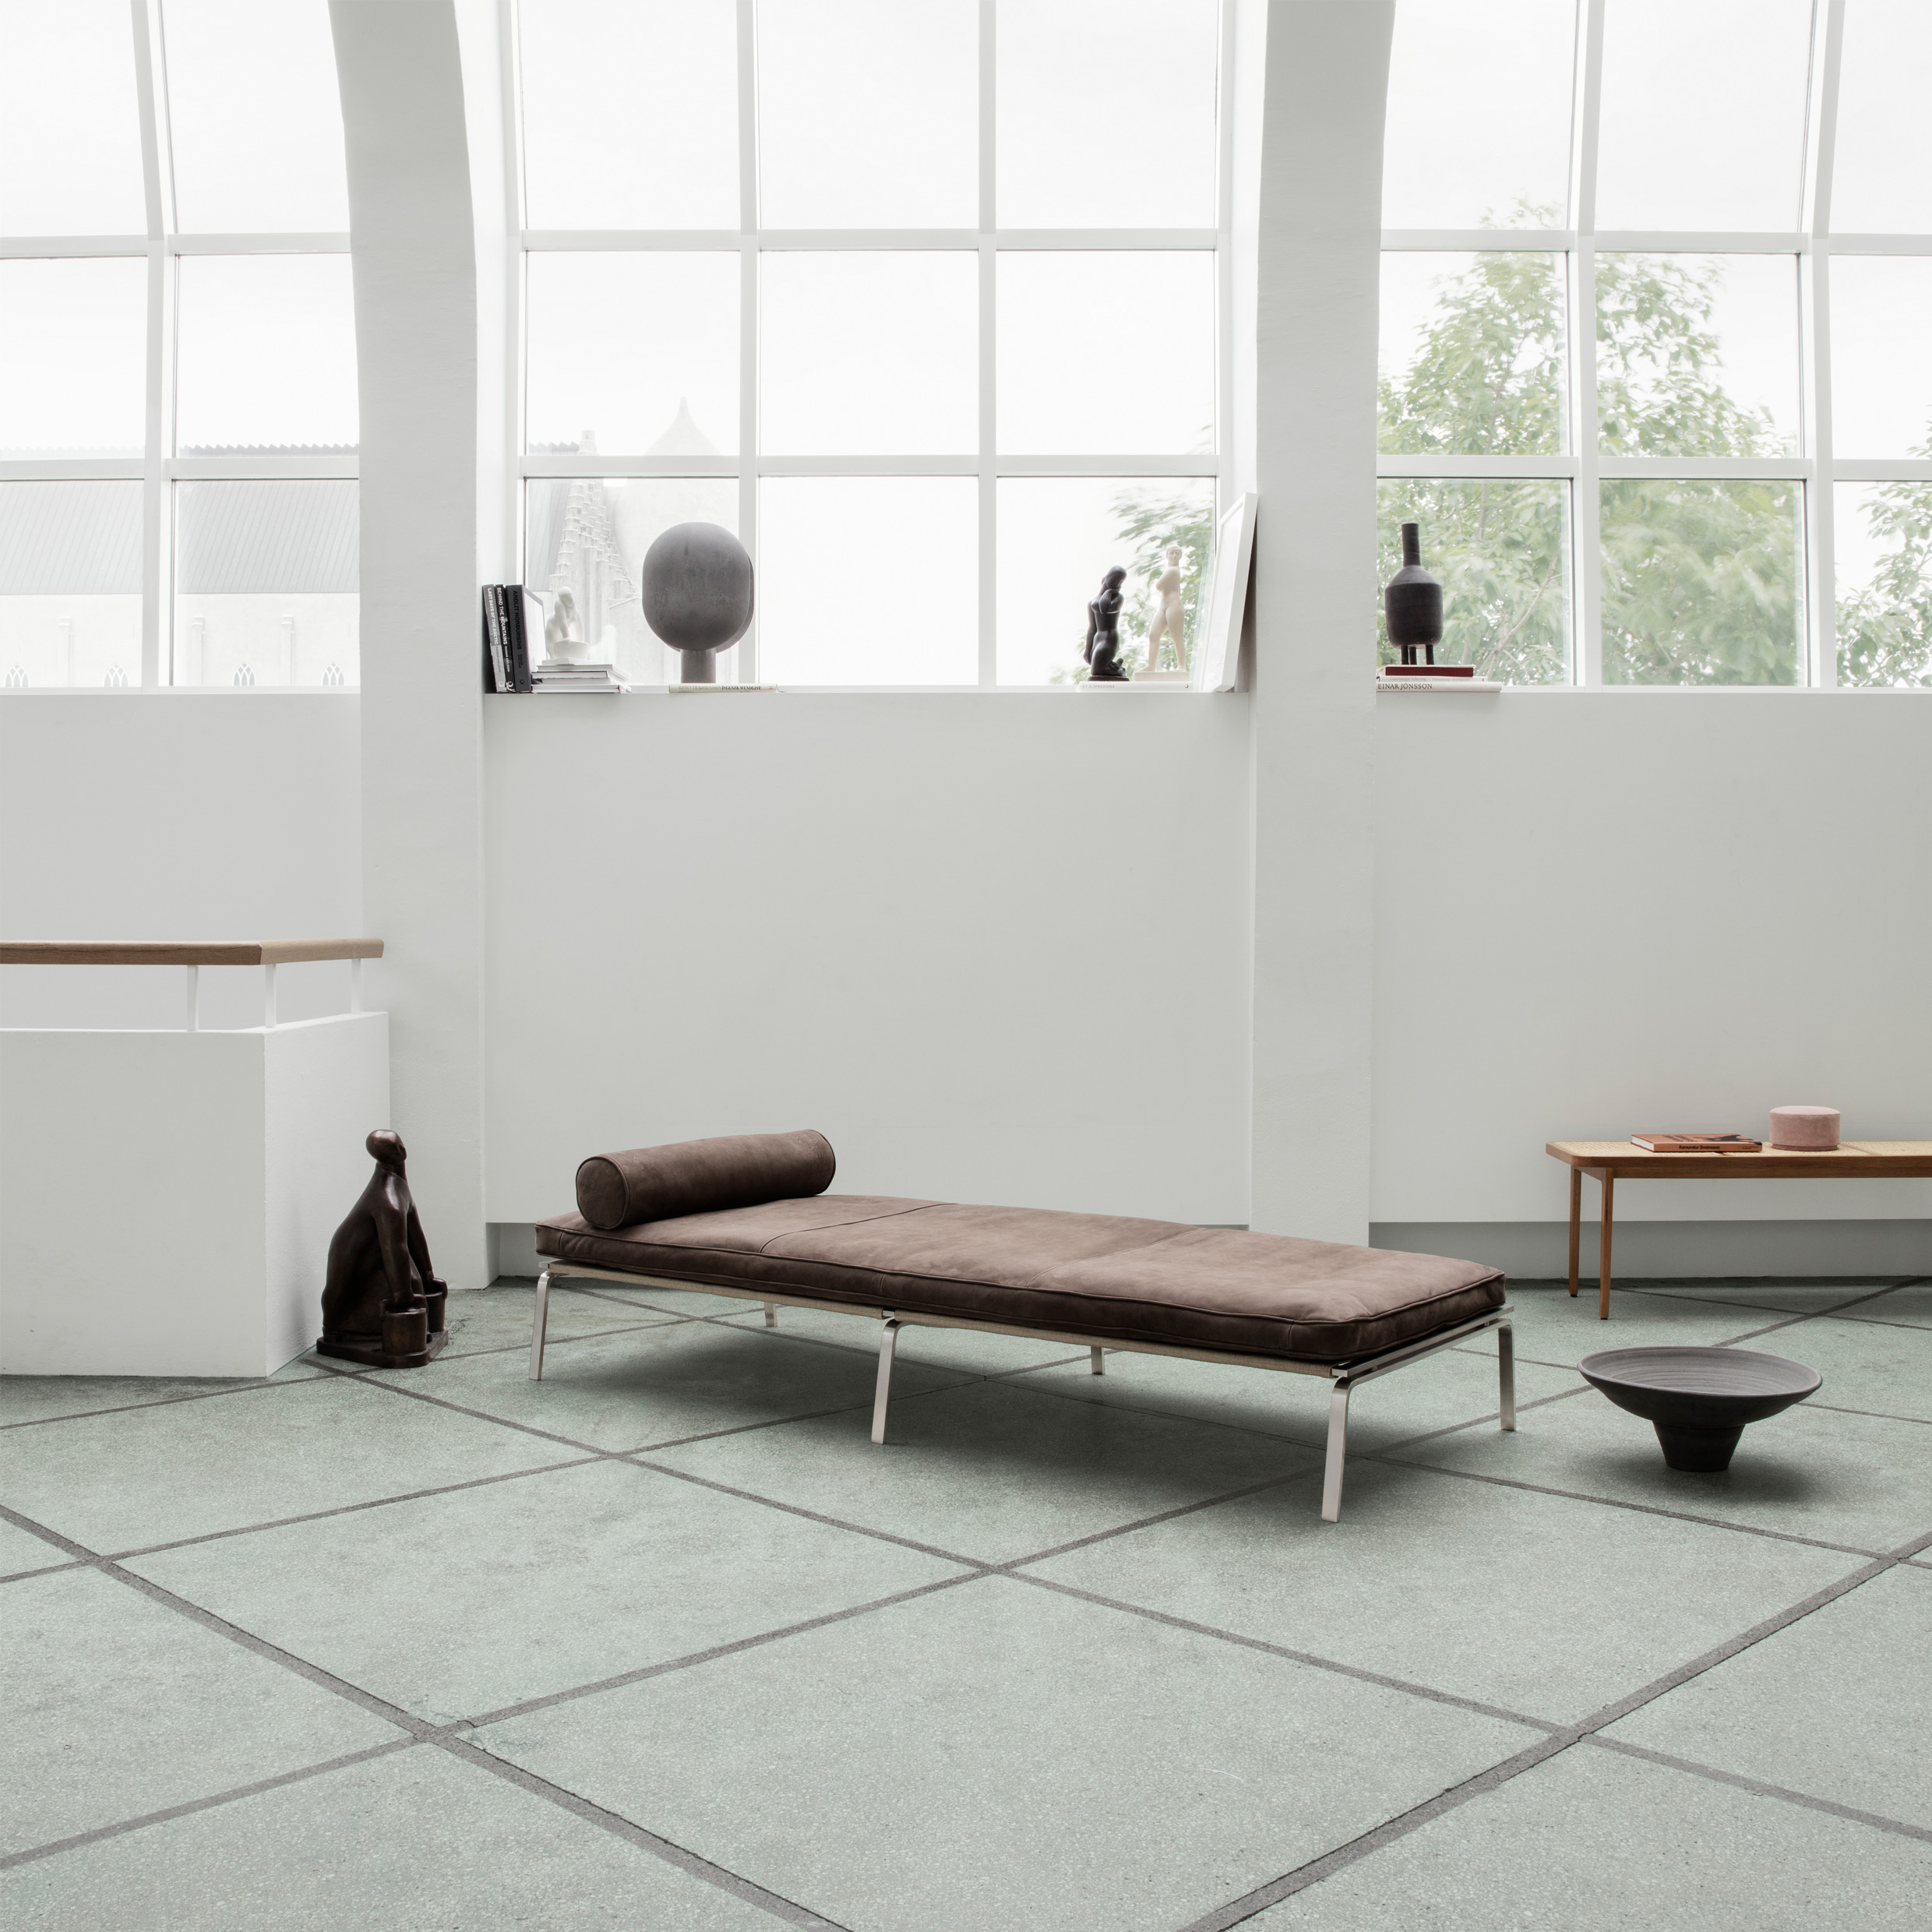 NORR11 // MAN - DAYBED | STEEL | LEATHER DUNES ANTHRACITE 21003